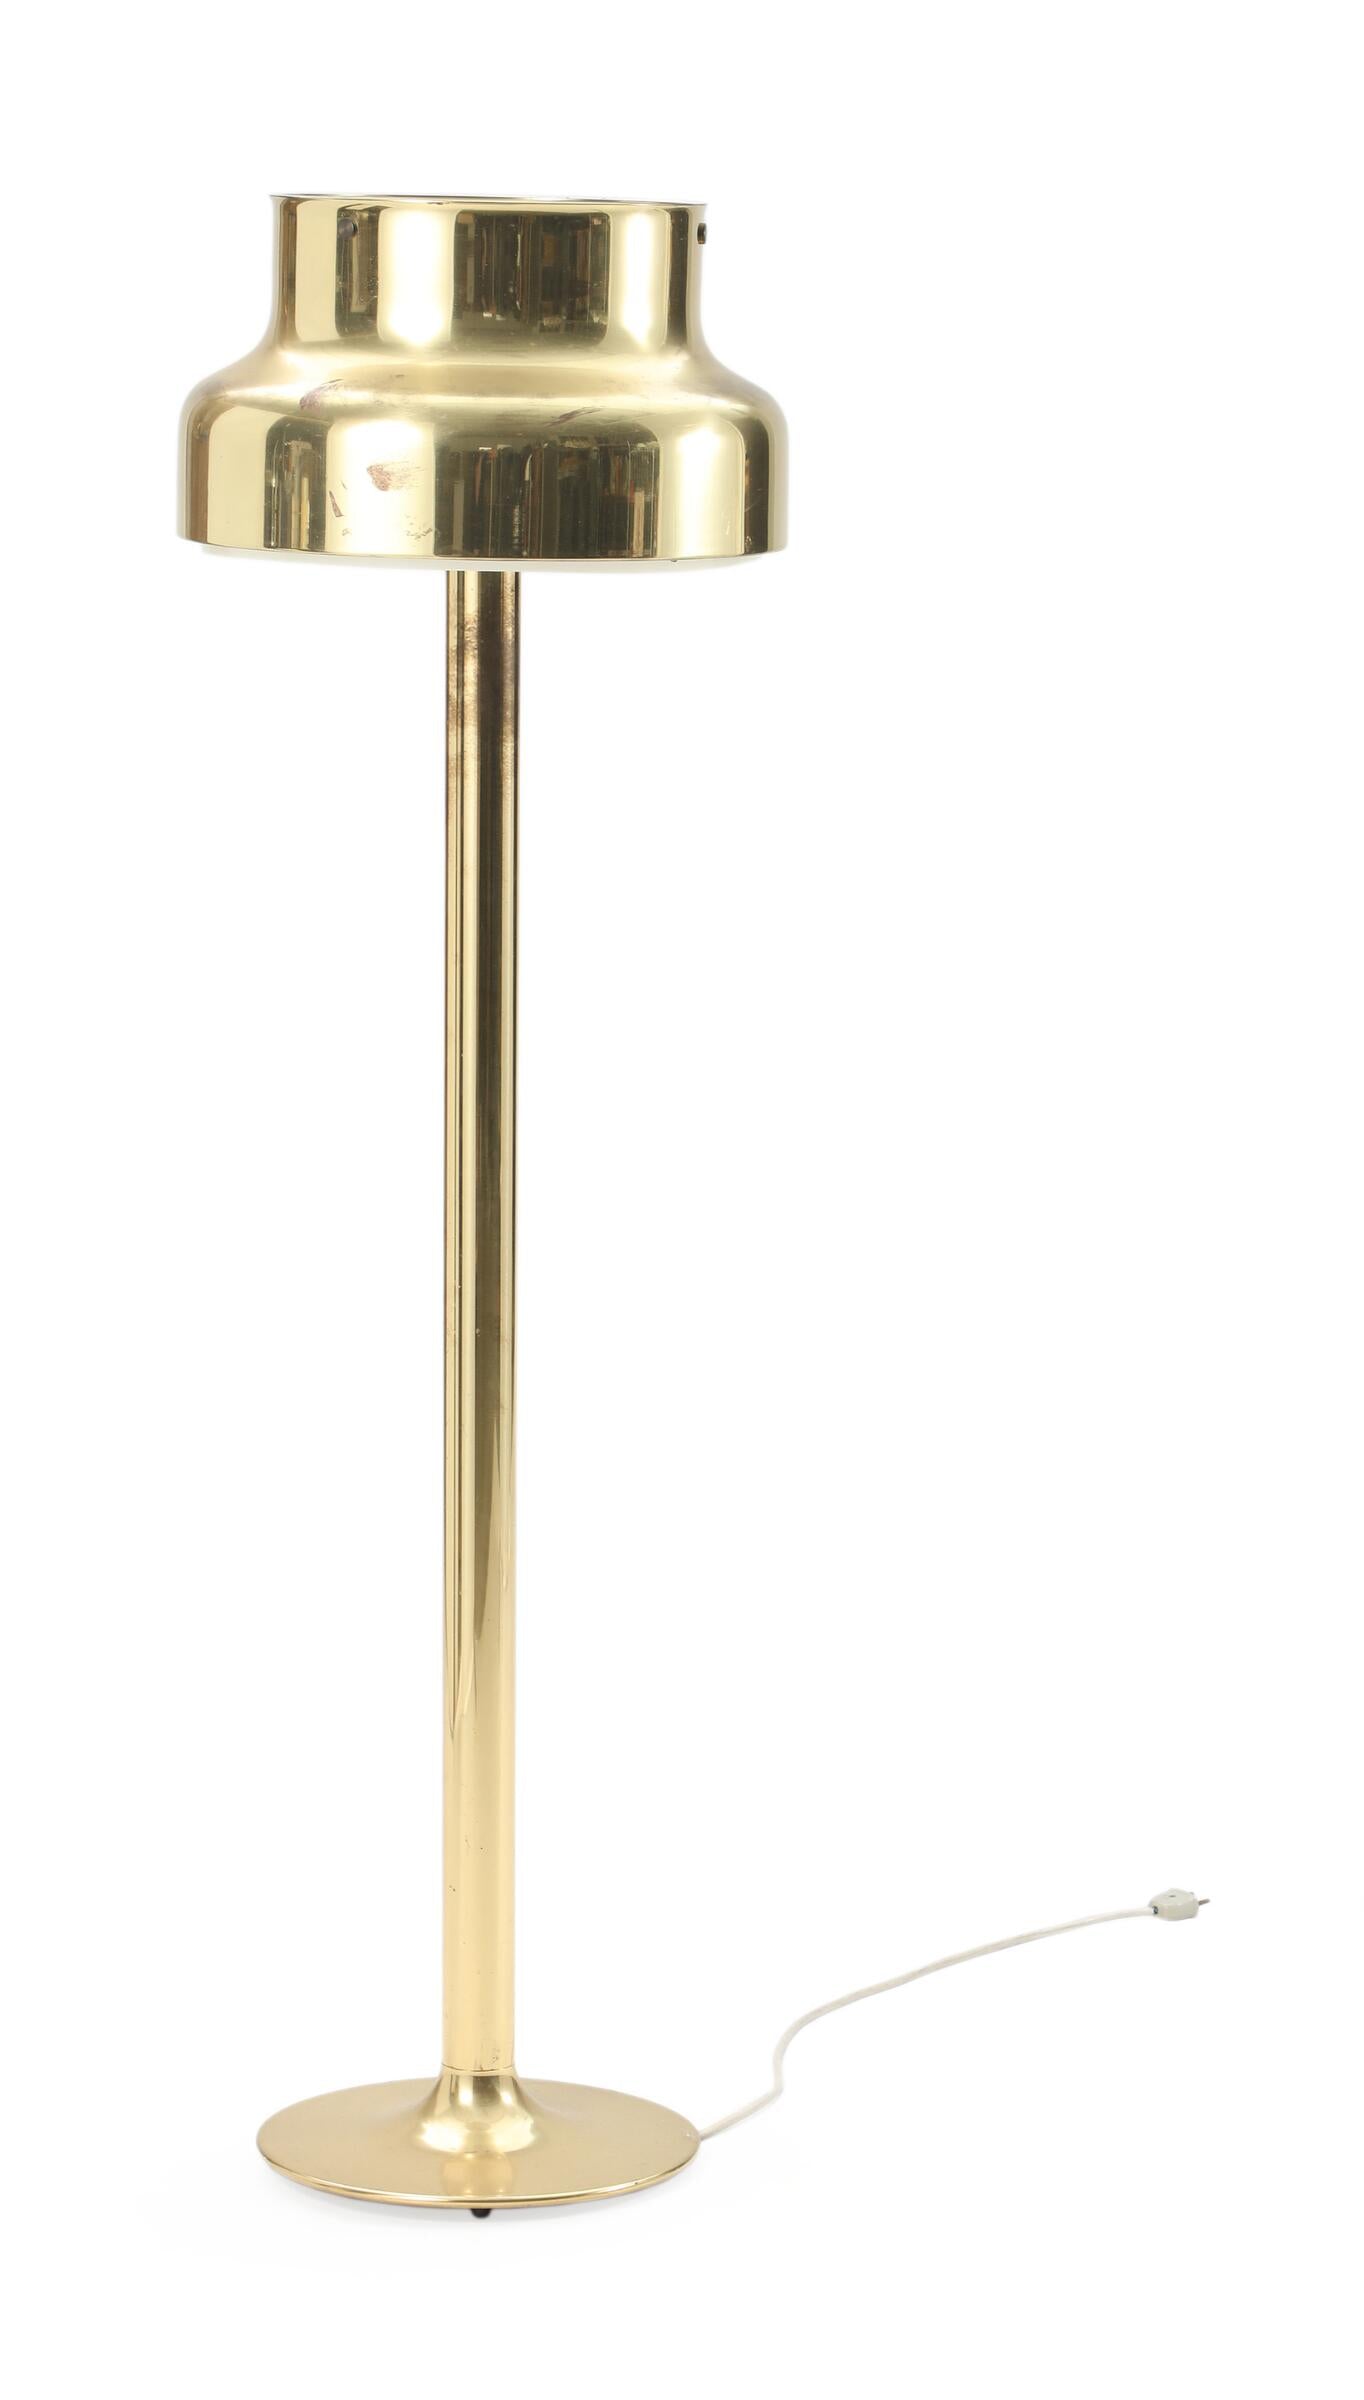 Bumling Brass Floor Lamp by Anders Pehrson, 1968